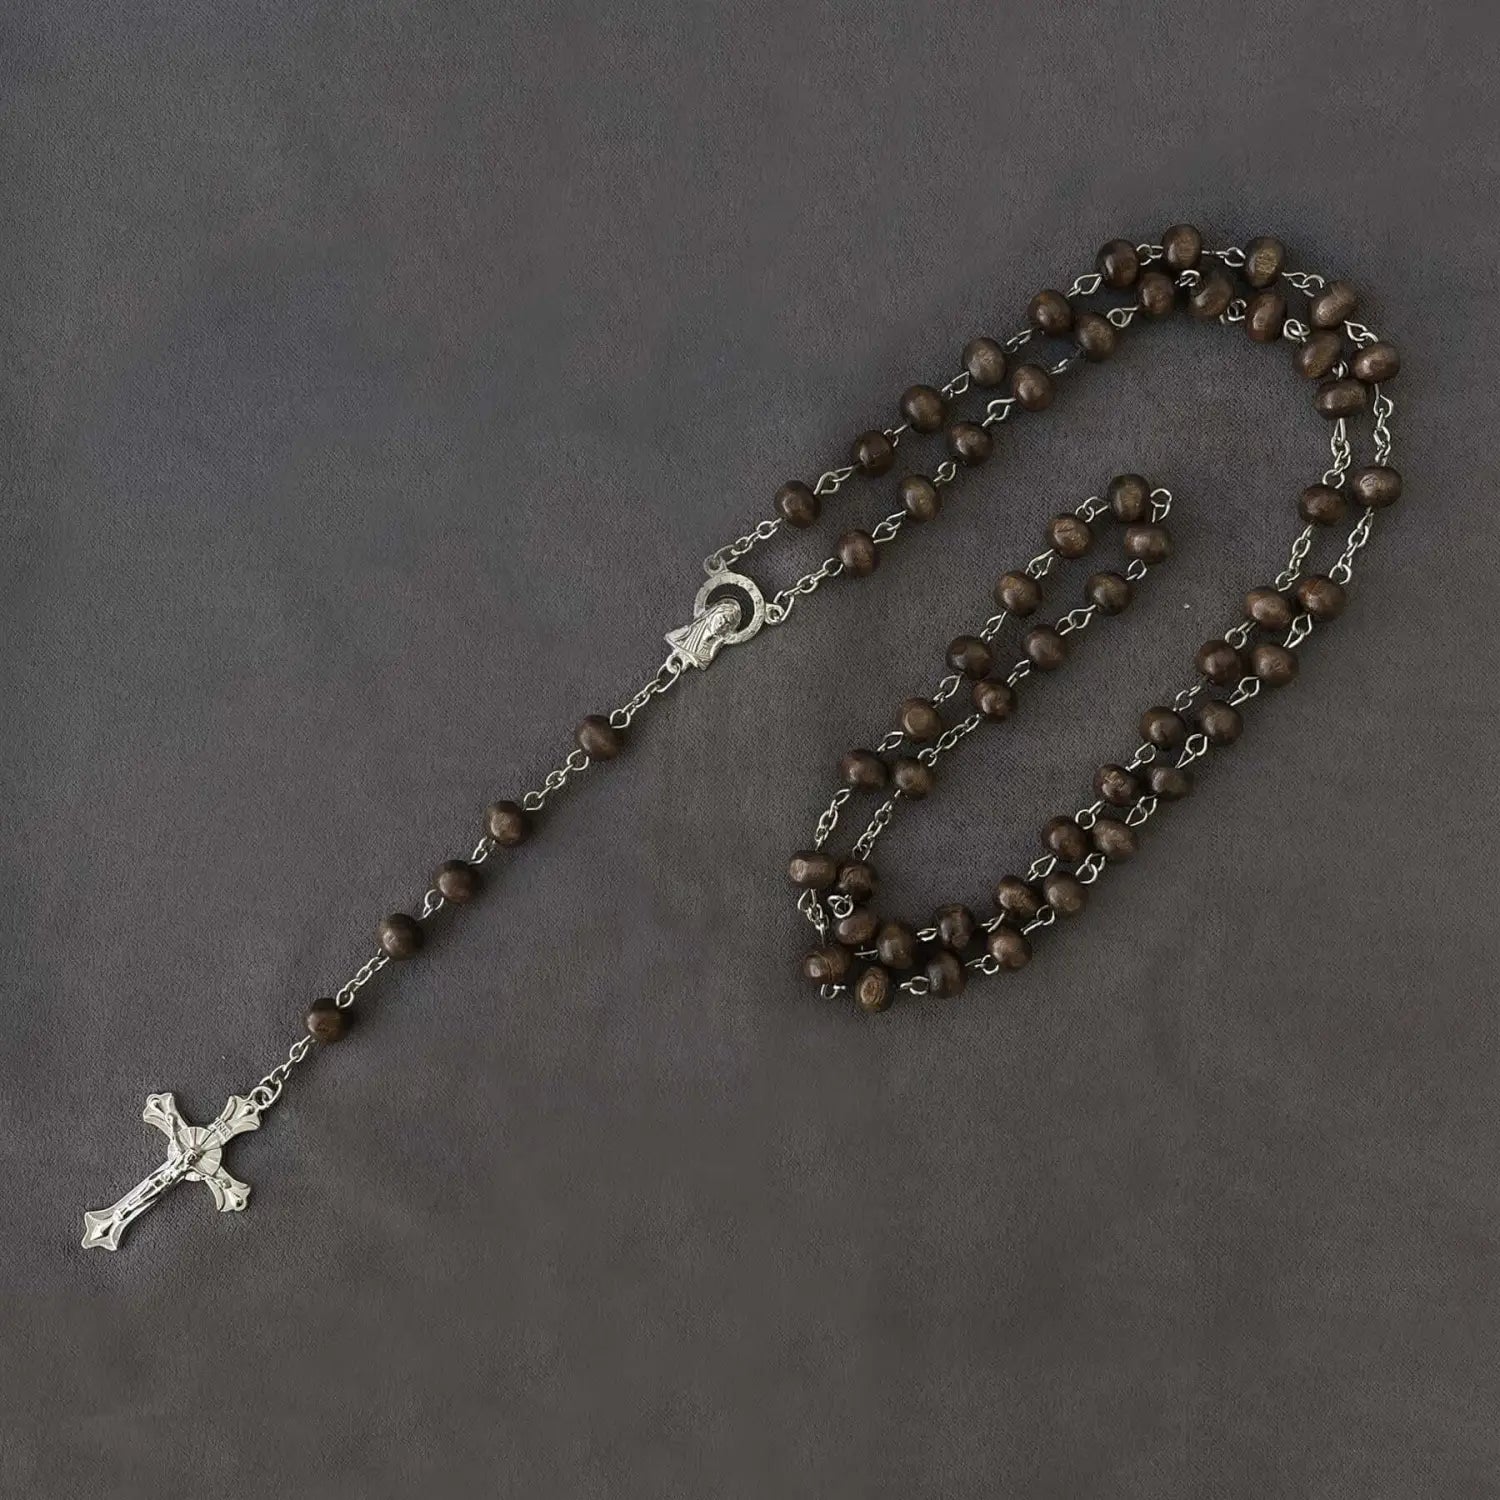 Metallic rosary beads necklace with cross and saints pendant